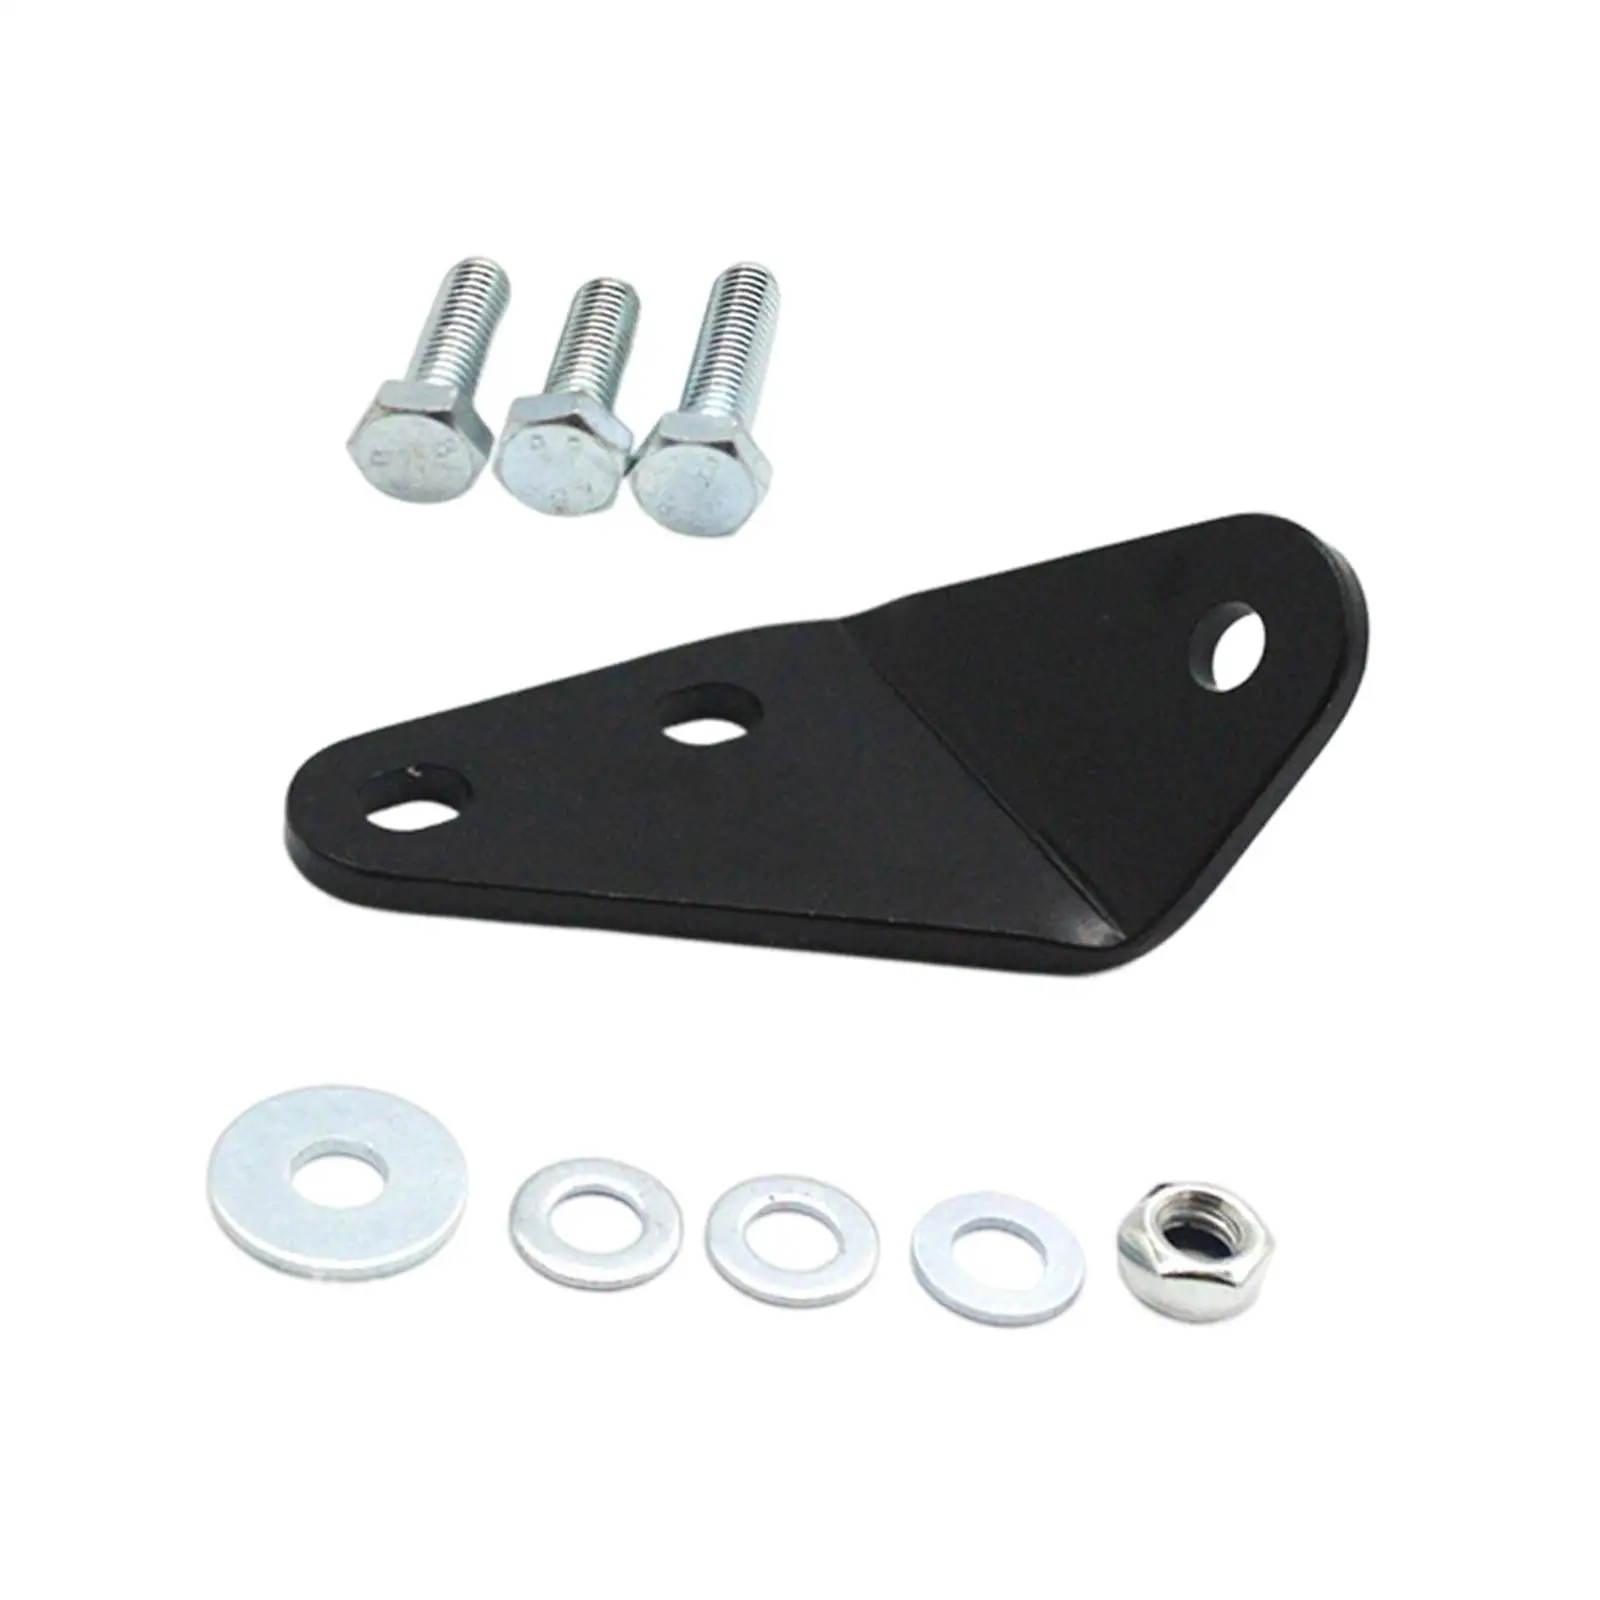 Clutch Pedal Repair Bracket Kit Sturdy Replace Parts for Volkswagen T4 Transporter Multivan Caravelle Accessory